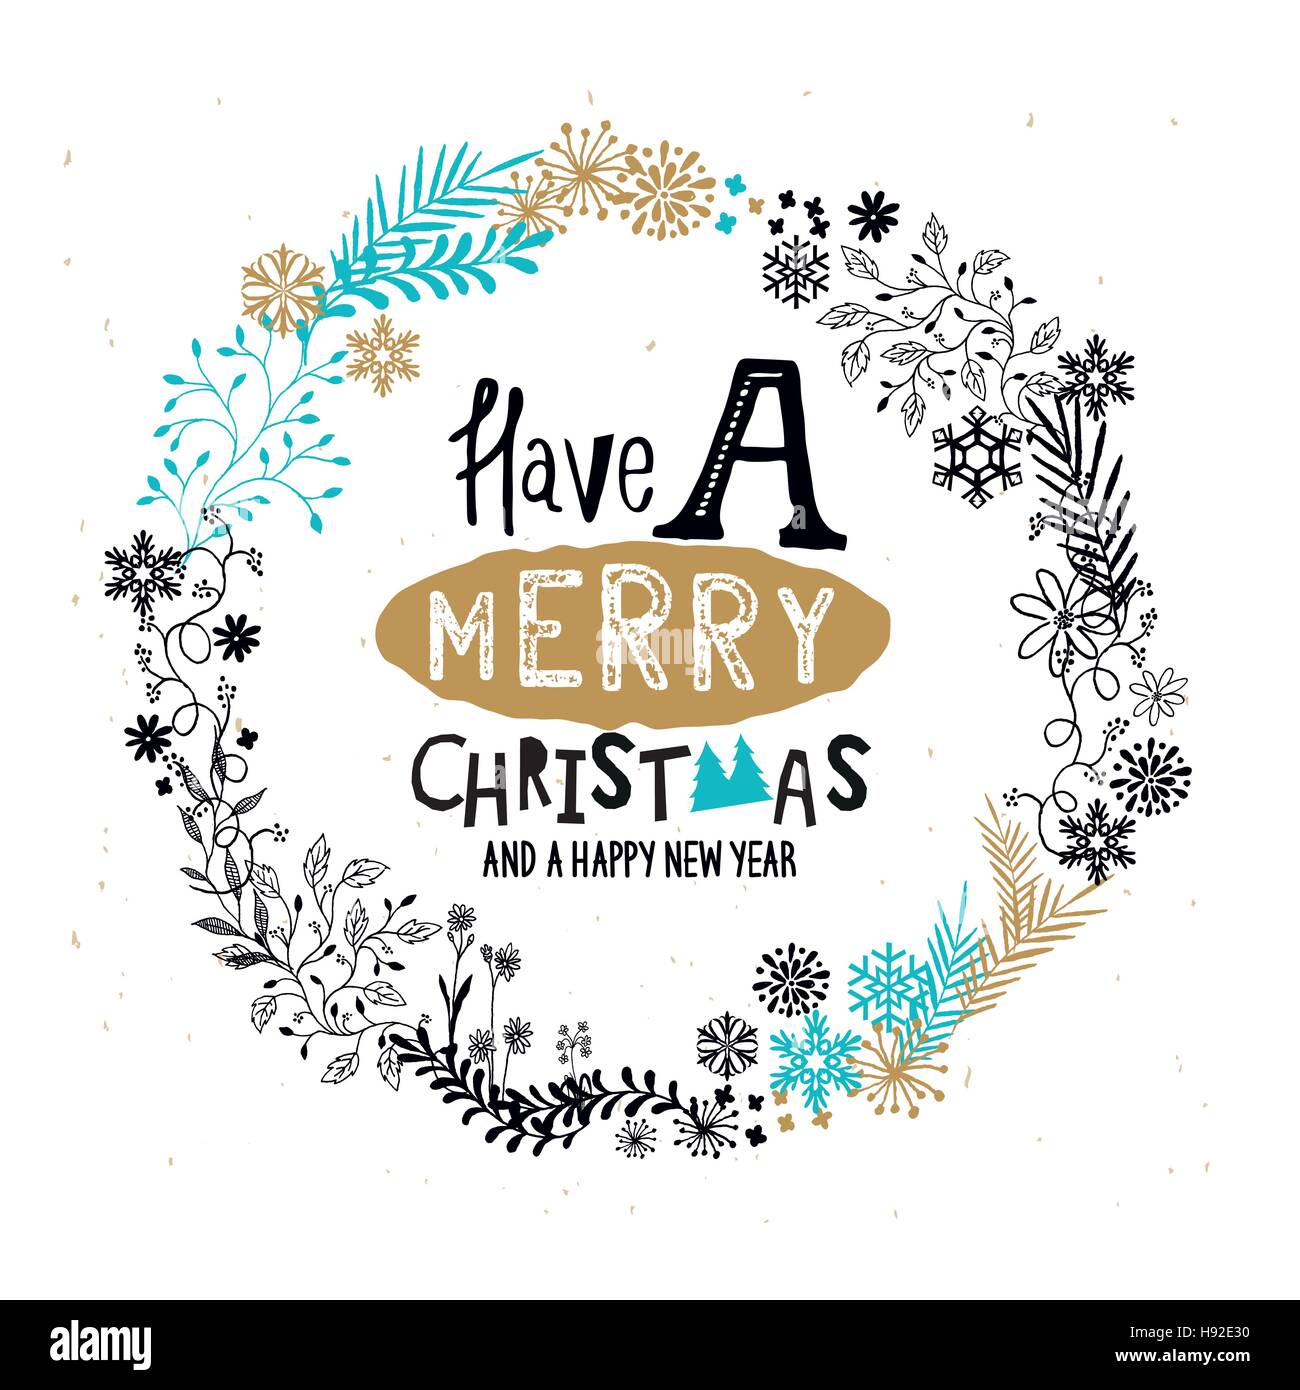 Merry Christmas Wreath with snowflakes and floral patterns. Vector illustration Stock Vector